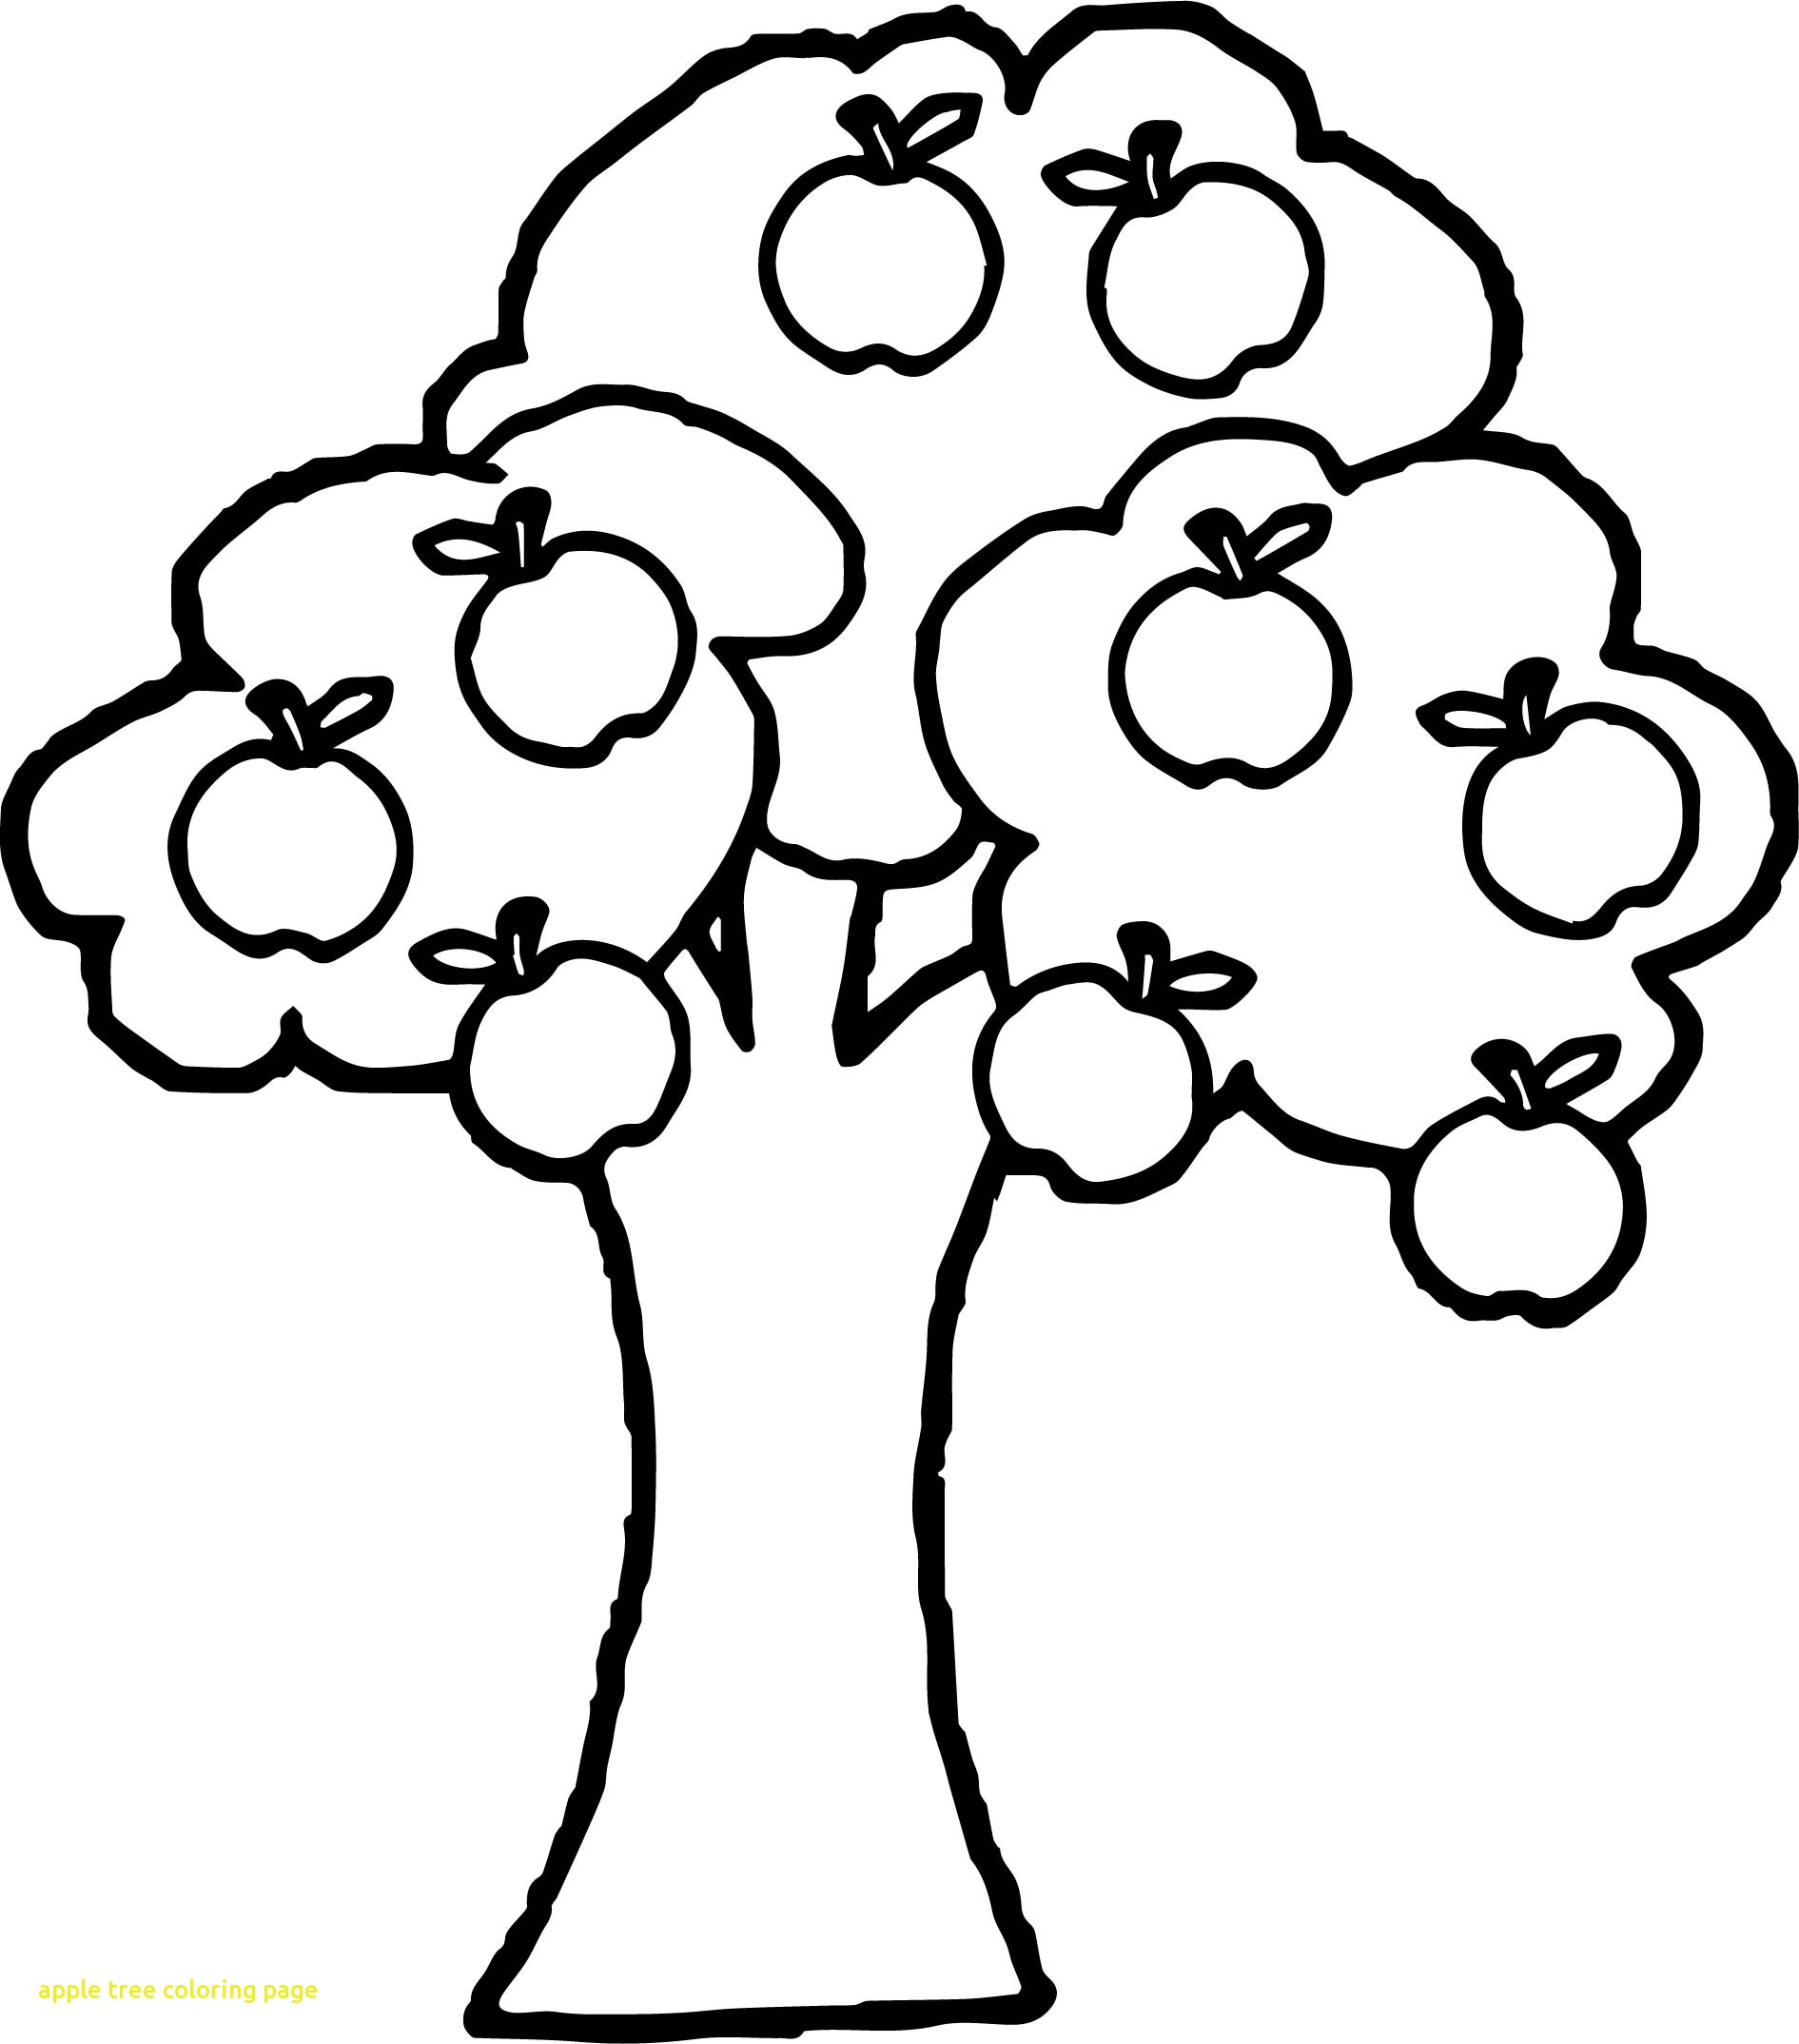 apple-tree-coloring-page-at-getcolorings-free-printable-colorings-pages-to-print-and-color